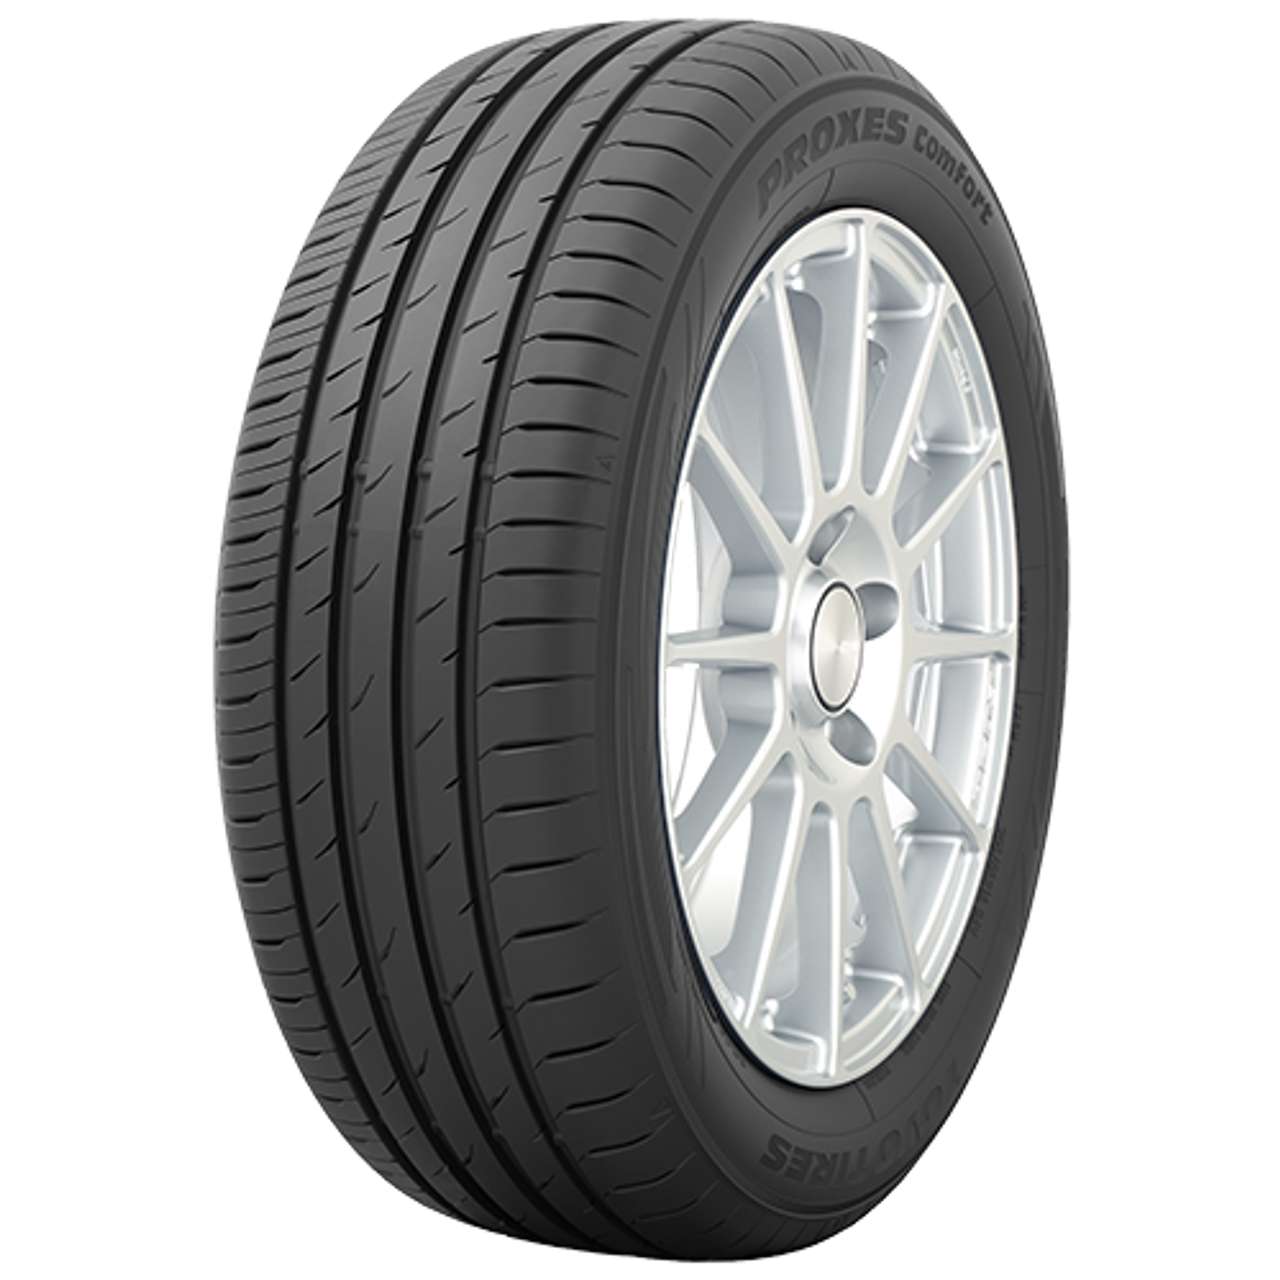 TOYO PROXES COMFORT 245/45R18 100W BSW XL